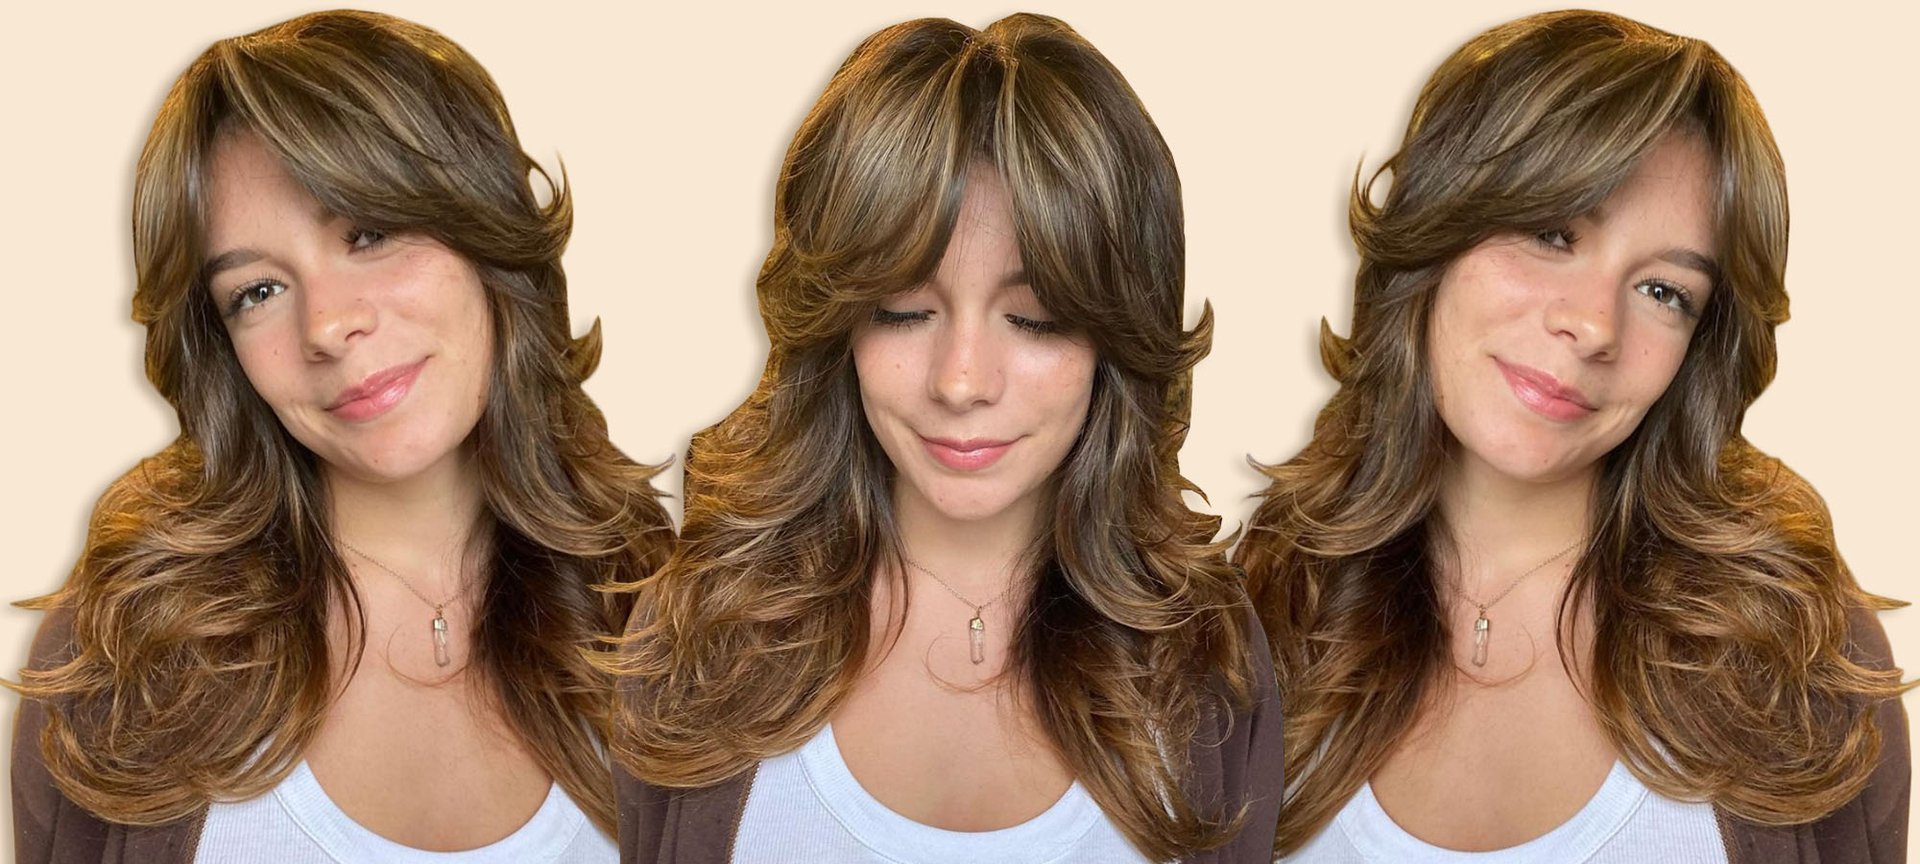 Virtually Try On Hairstyles for Free  We Built an App